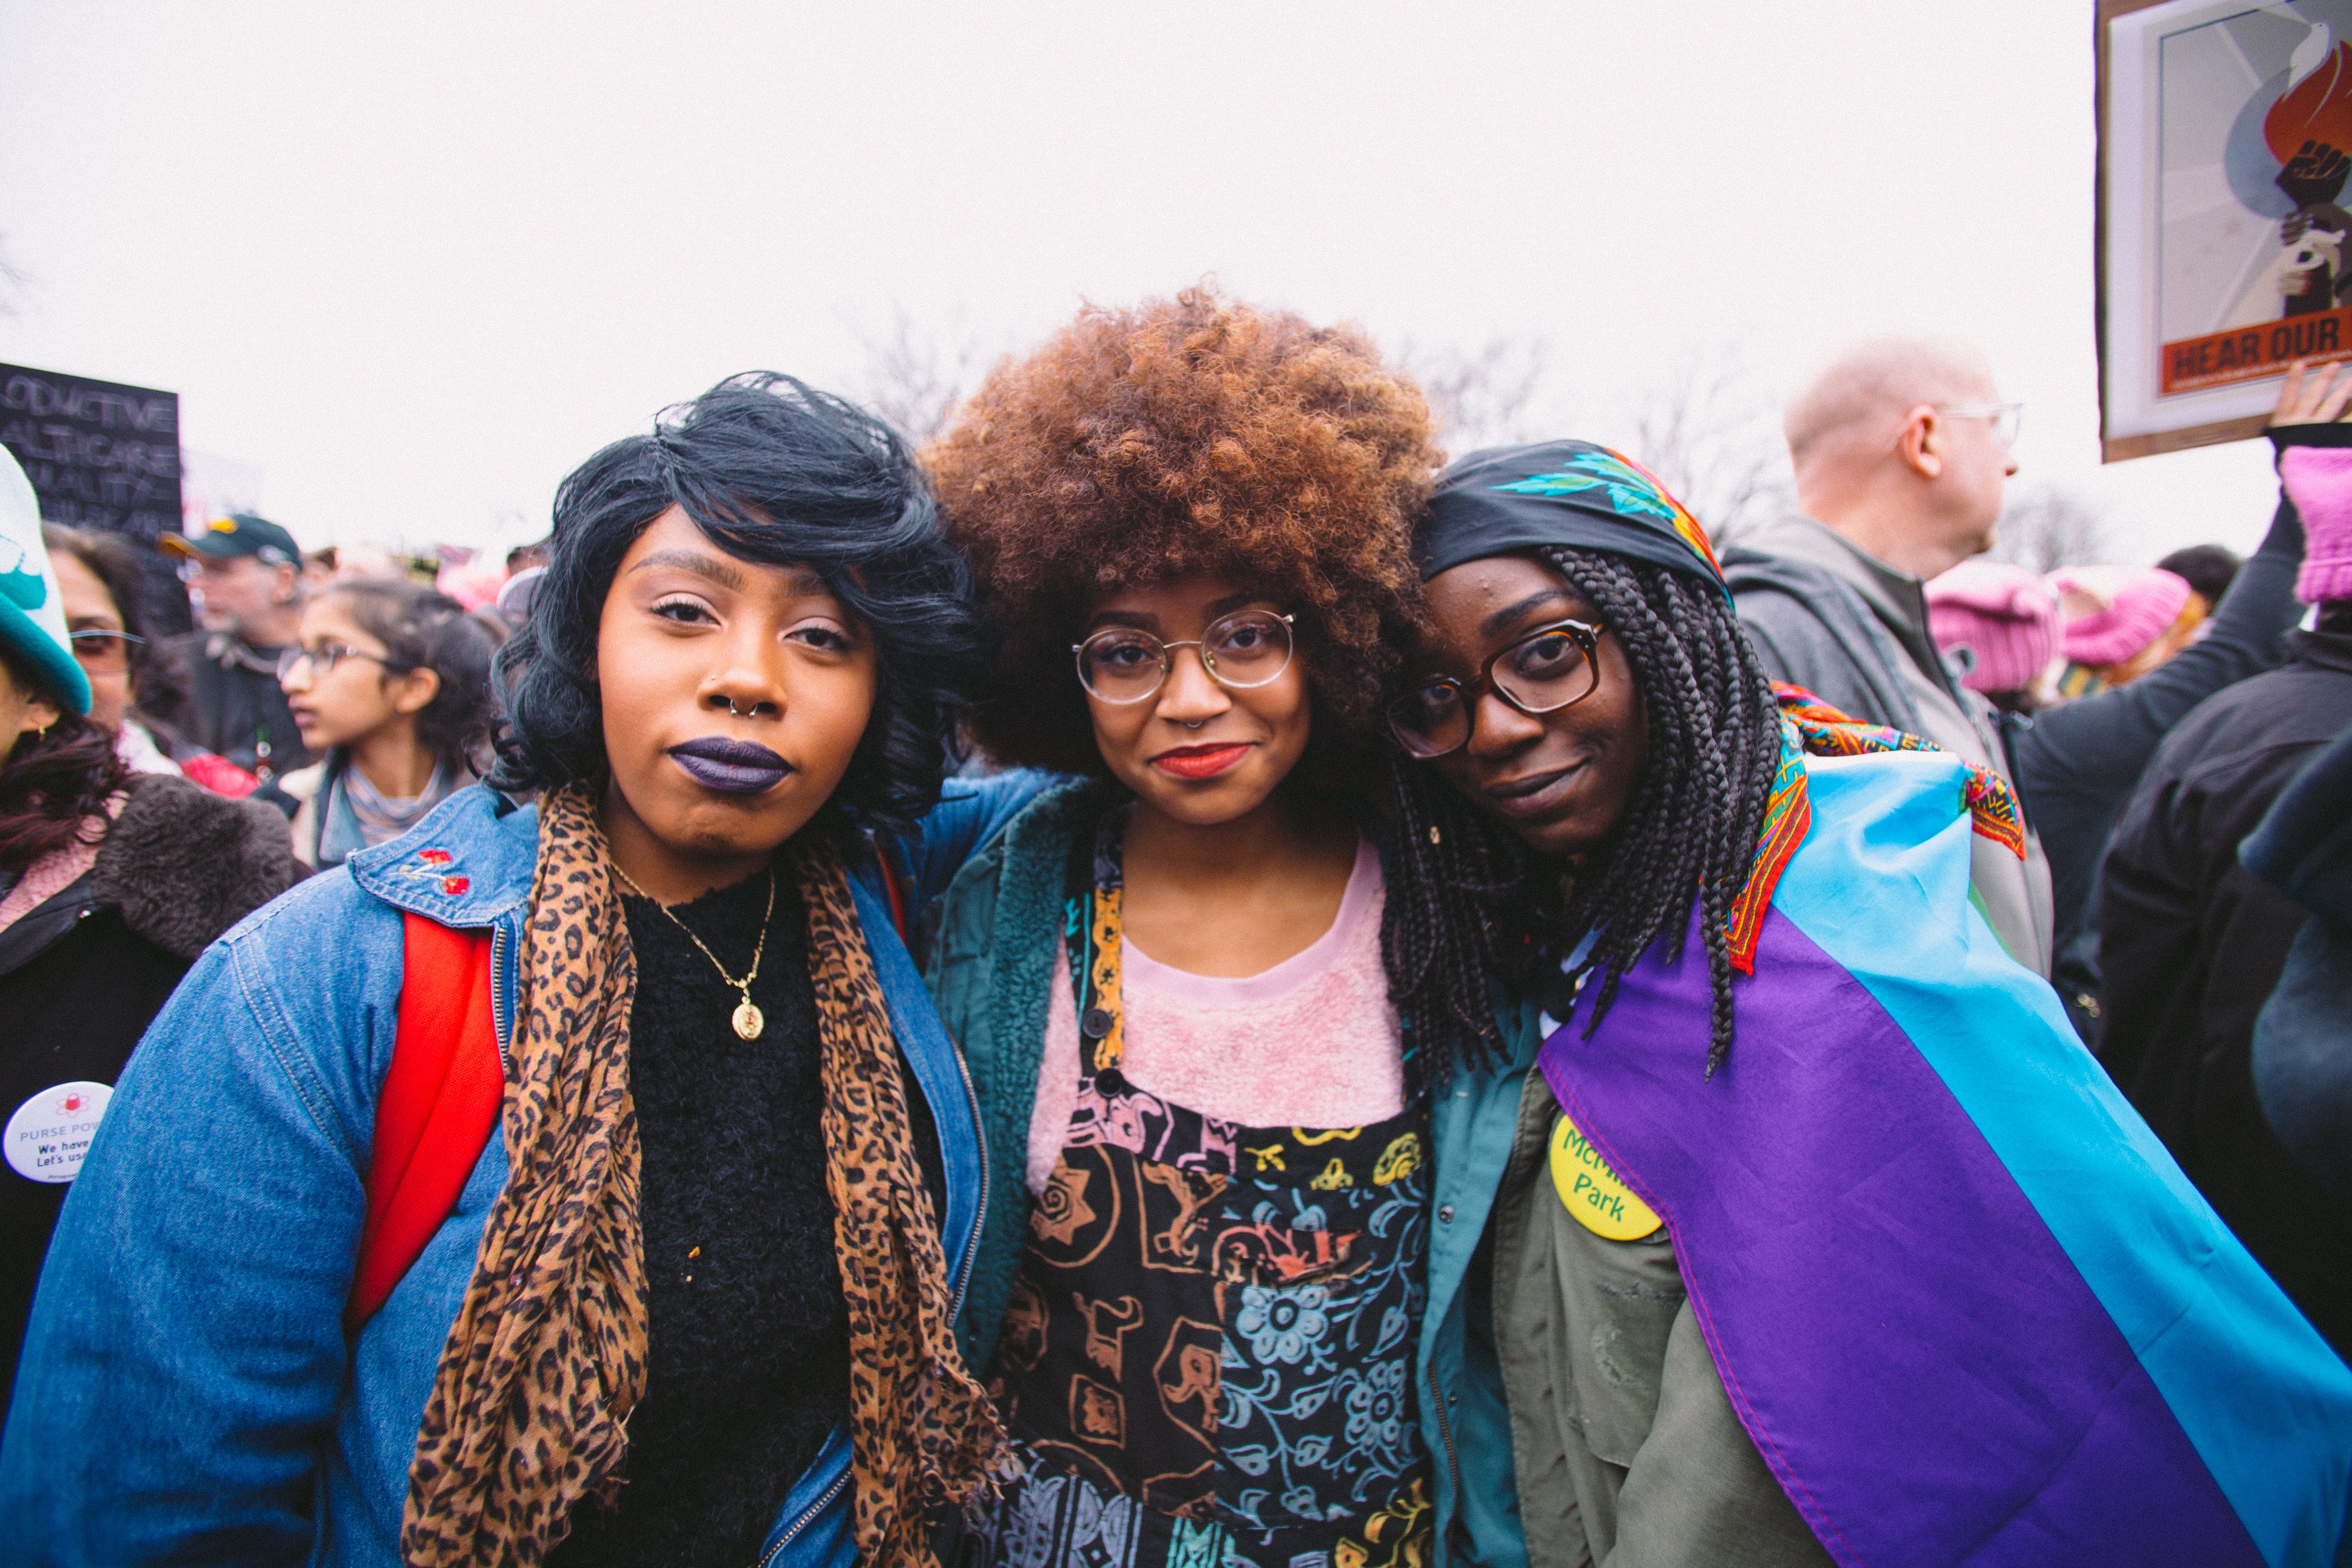 We Asked Women How To Protect Black Girl Magic In A Trump Presidency — This Is What They Said
